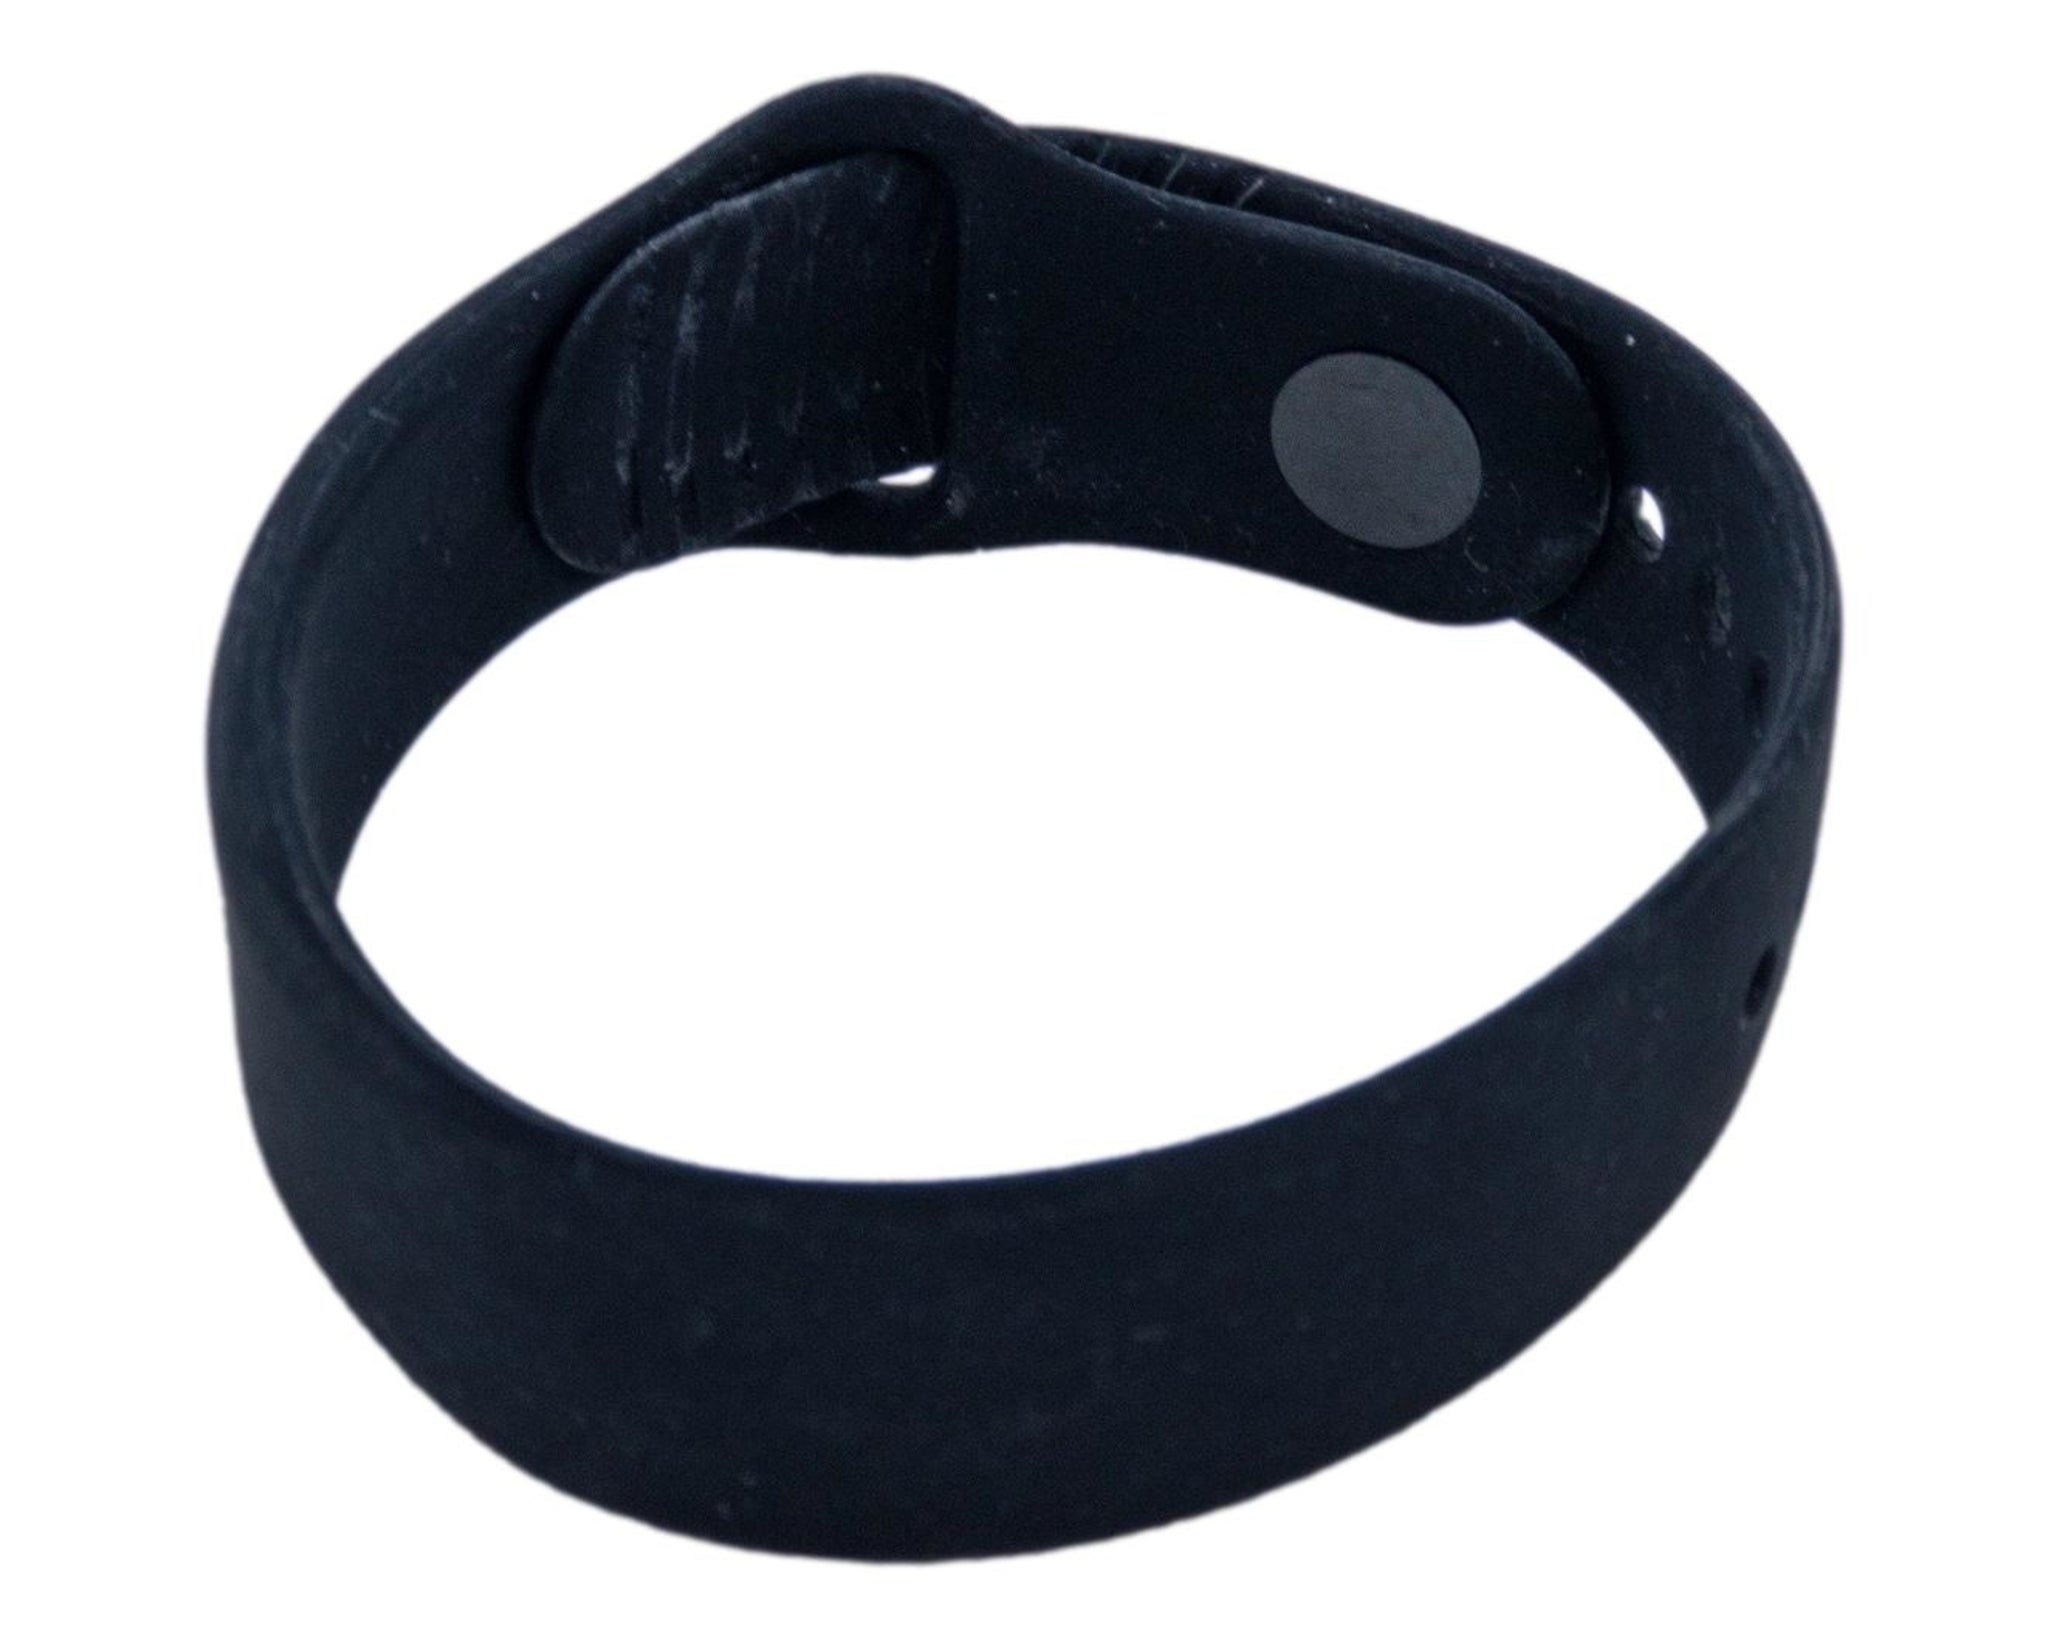 Clearance Sport Pin-Tuck Band 19mm